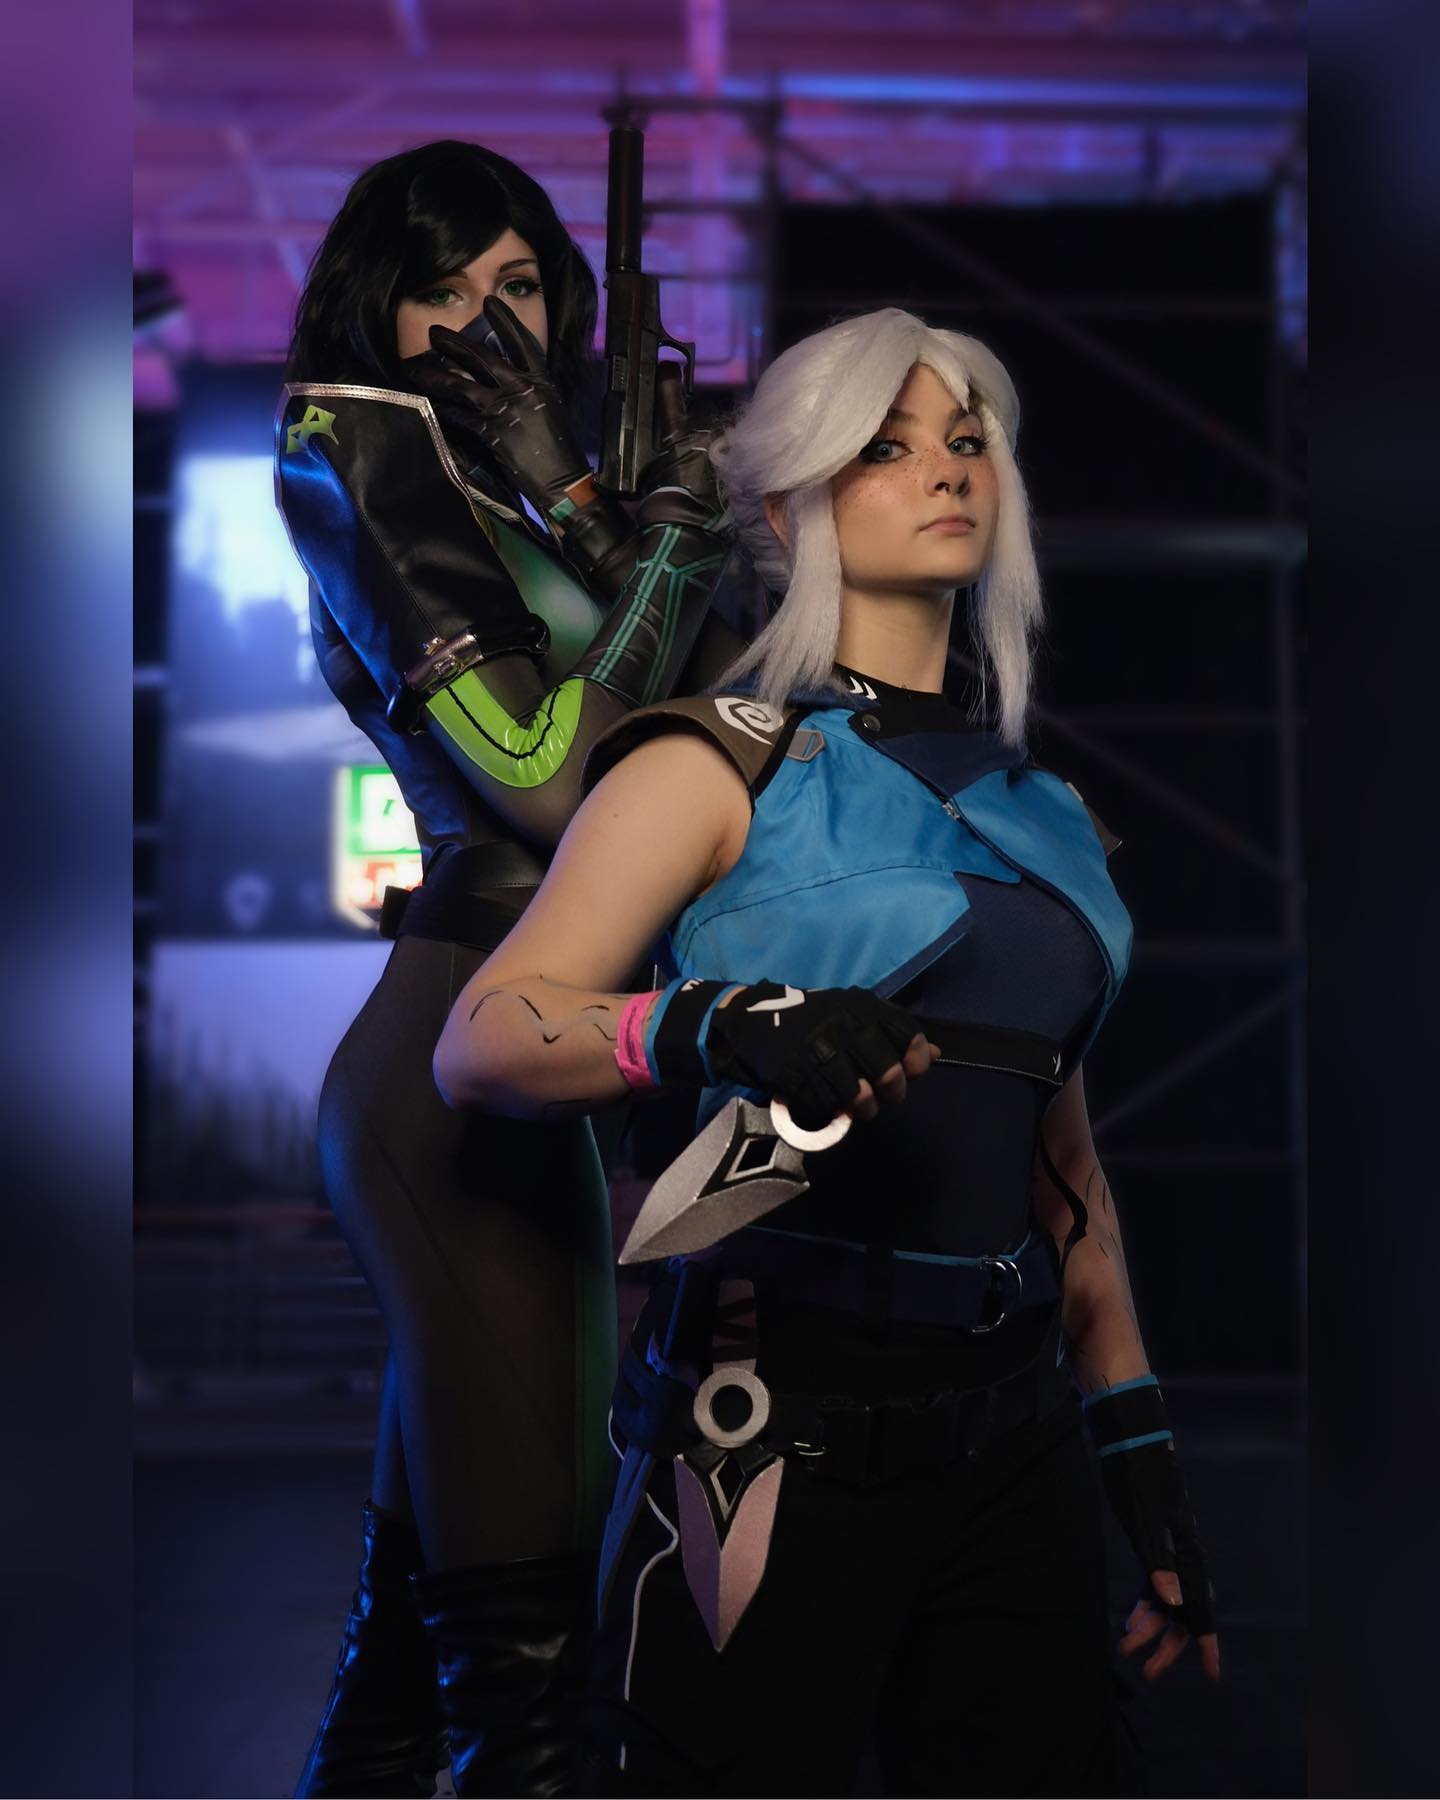 JETT 🌪️ VIPER 🧪
-
ME AND @polymerfuchs COSPLAYED JETT AND VIPER AT @dreamhackde SUNDAY !! it was so fun 😩🫶
-
pictures taken by @erynnyen !
-
tags!
#cosplay #cosplayer #cosplayersofinstagram #cosplaying #cosplaygirl #valorant #valorantgame #valorantcosplay #riotgames #jettcosplay #jett #vipercosplay #viper #vipervalorant #jettvalorant #dreamhackhannover #dreamhack #viral #gaming #gamecosplay